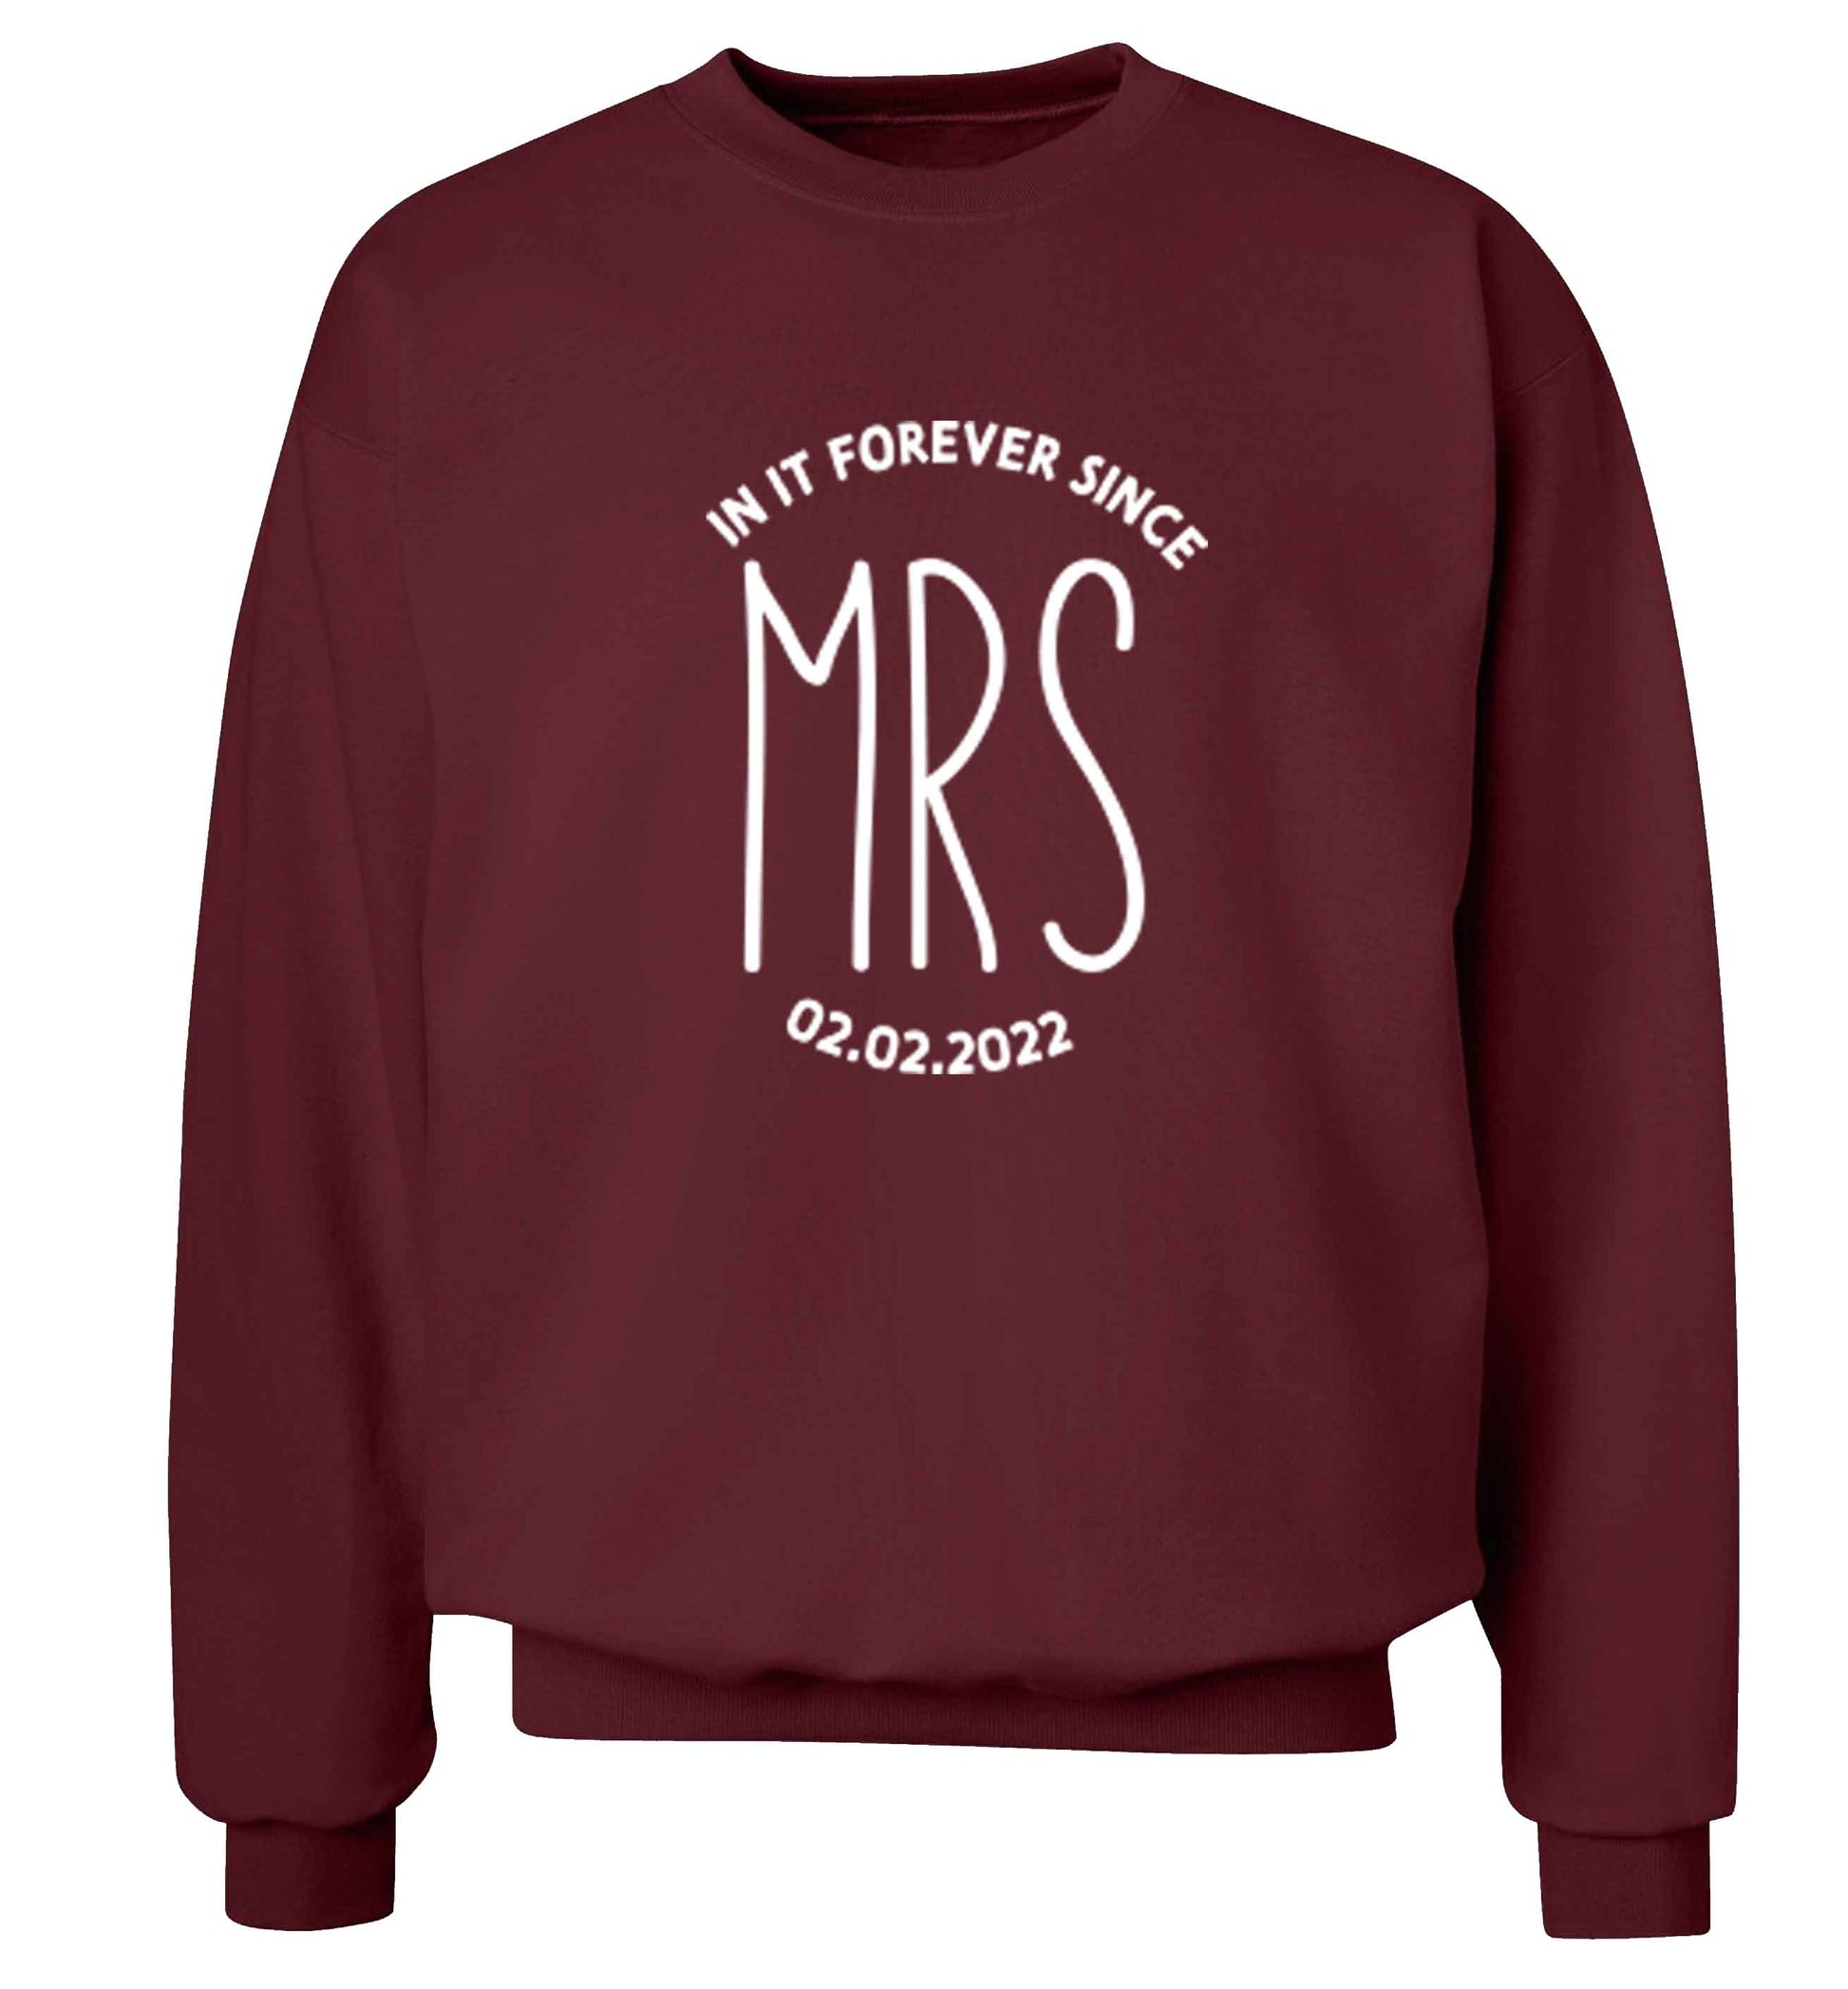 Funny matching gifts for him and her! Get matchy matchy, ideal for newlywed couples or a little valentines gift! adult's unisex maroon sweater 2XL